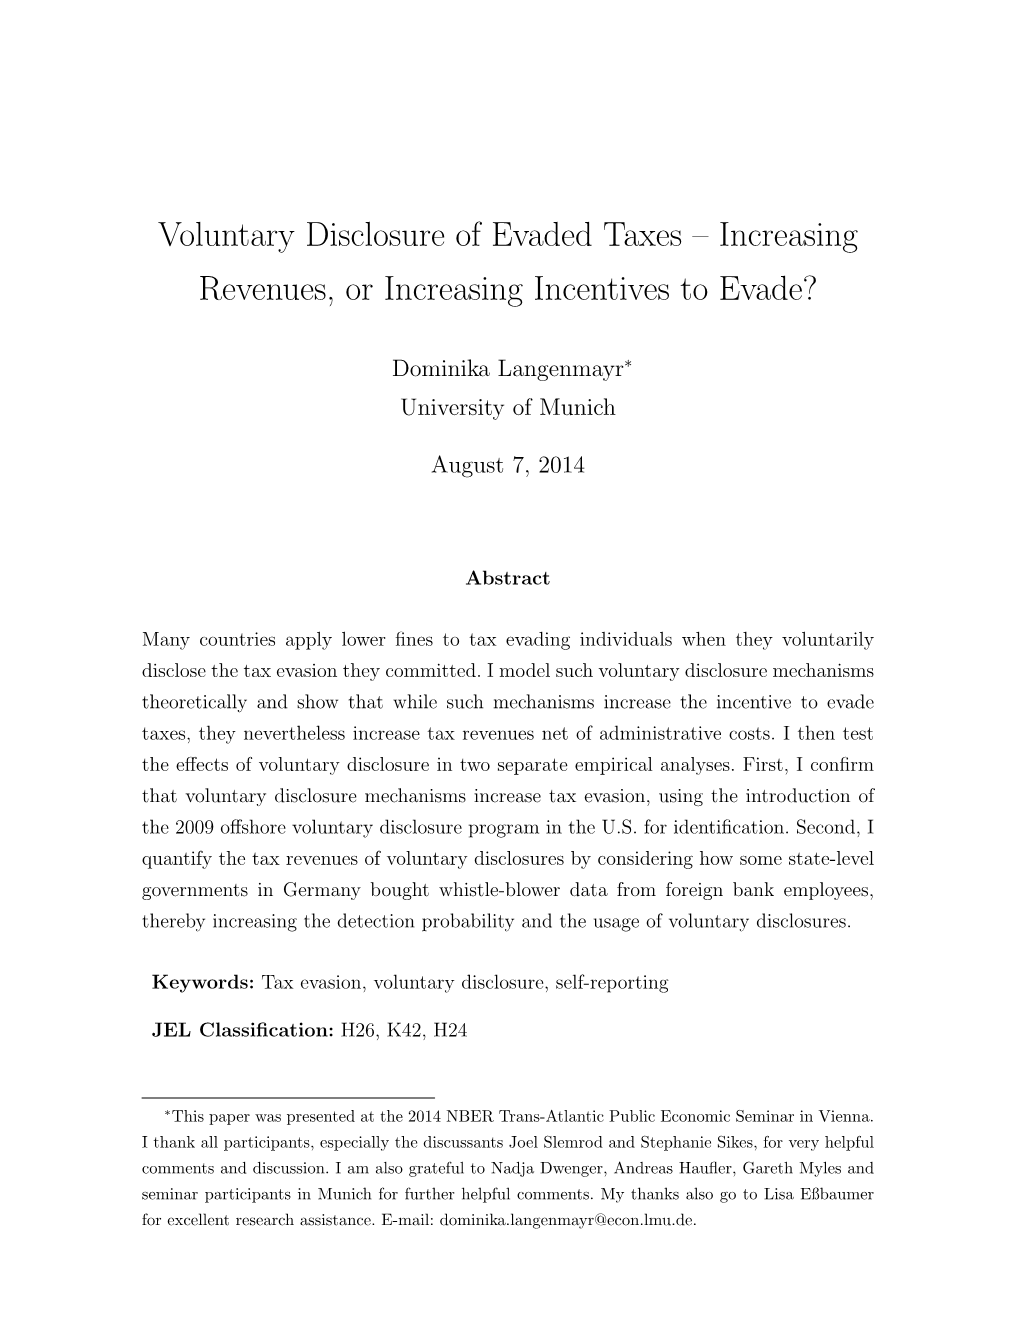 Voluntary Disclosure of Evaded Taxes – Increasing Revenues, Or Increasing Incentives to Evade?